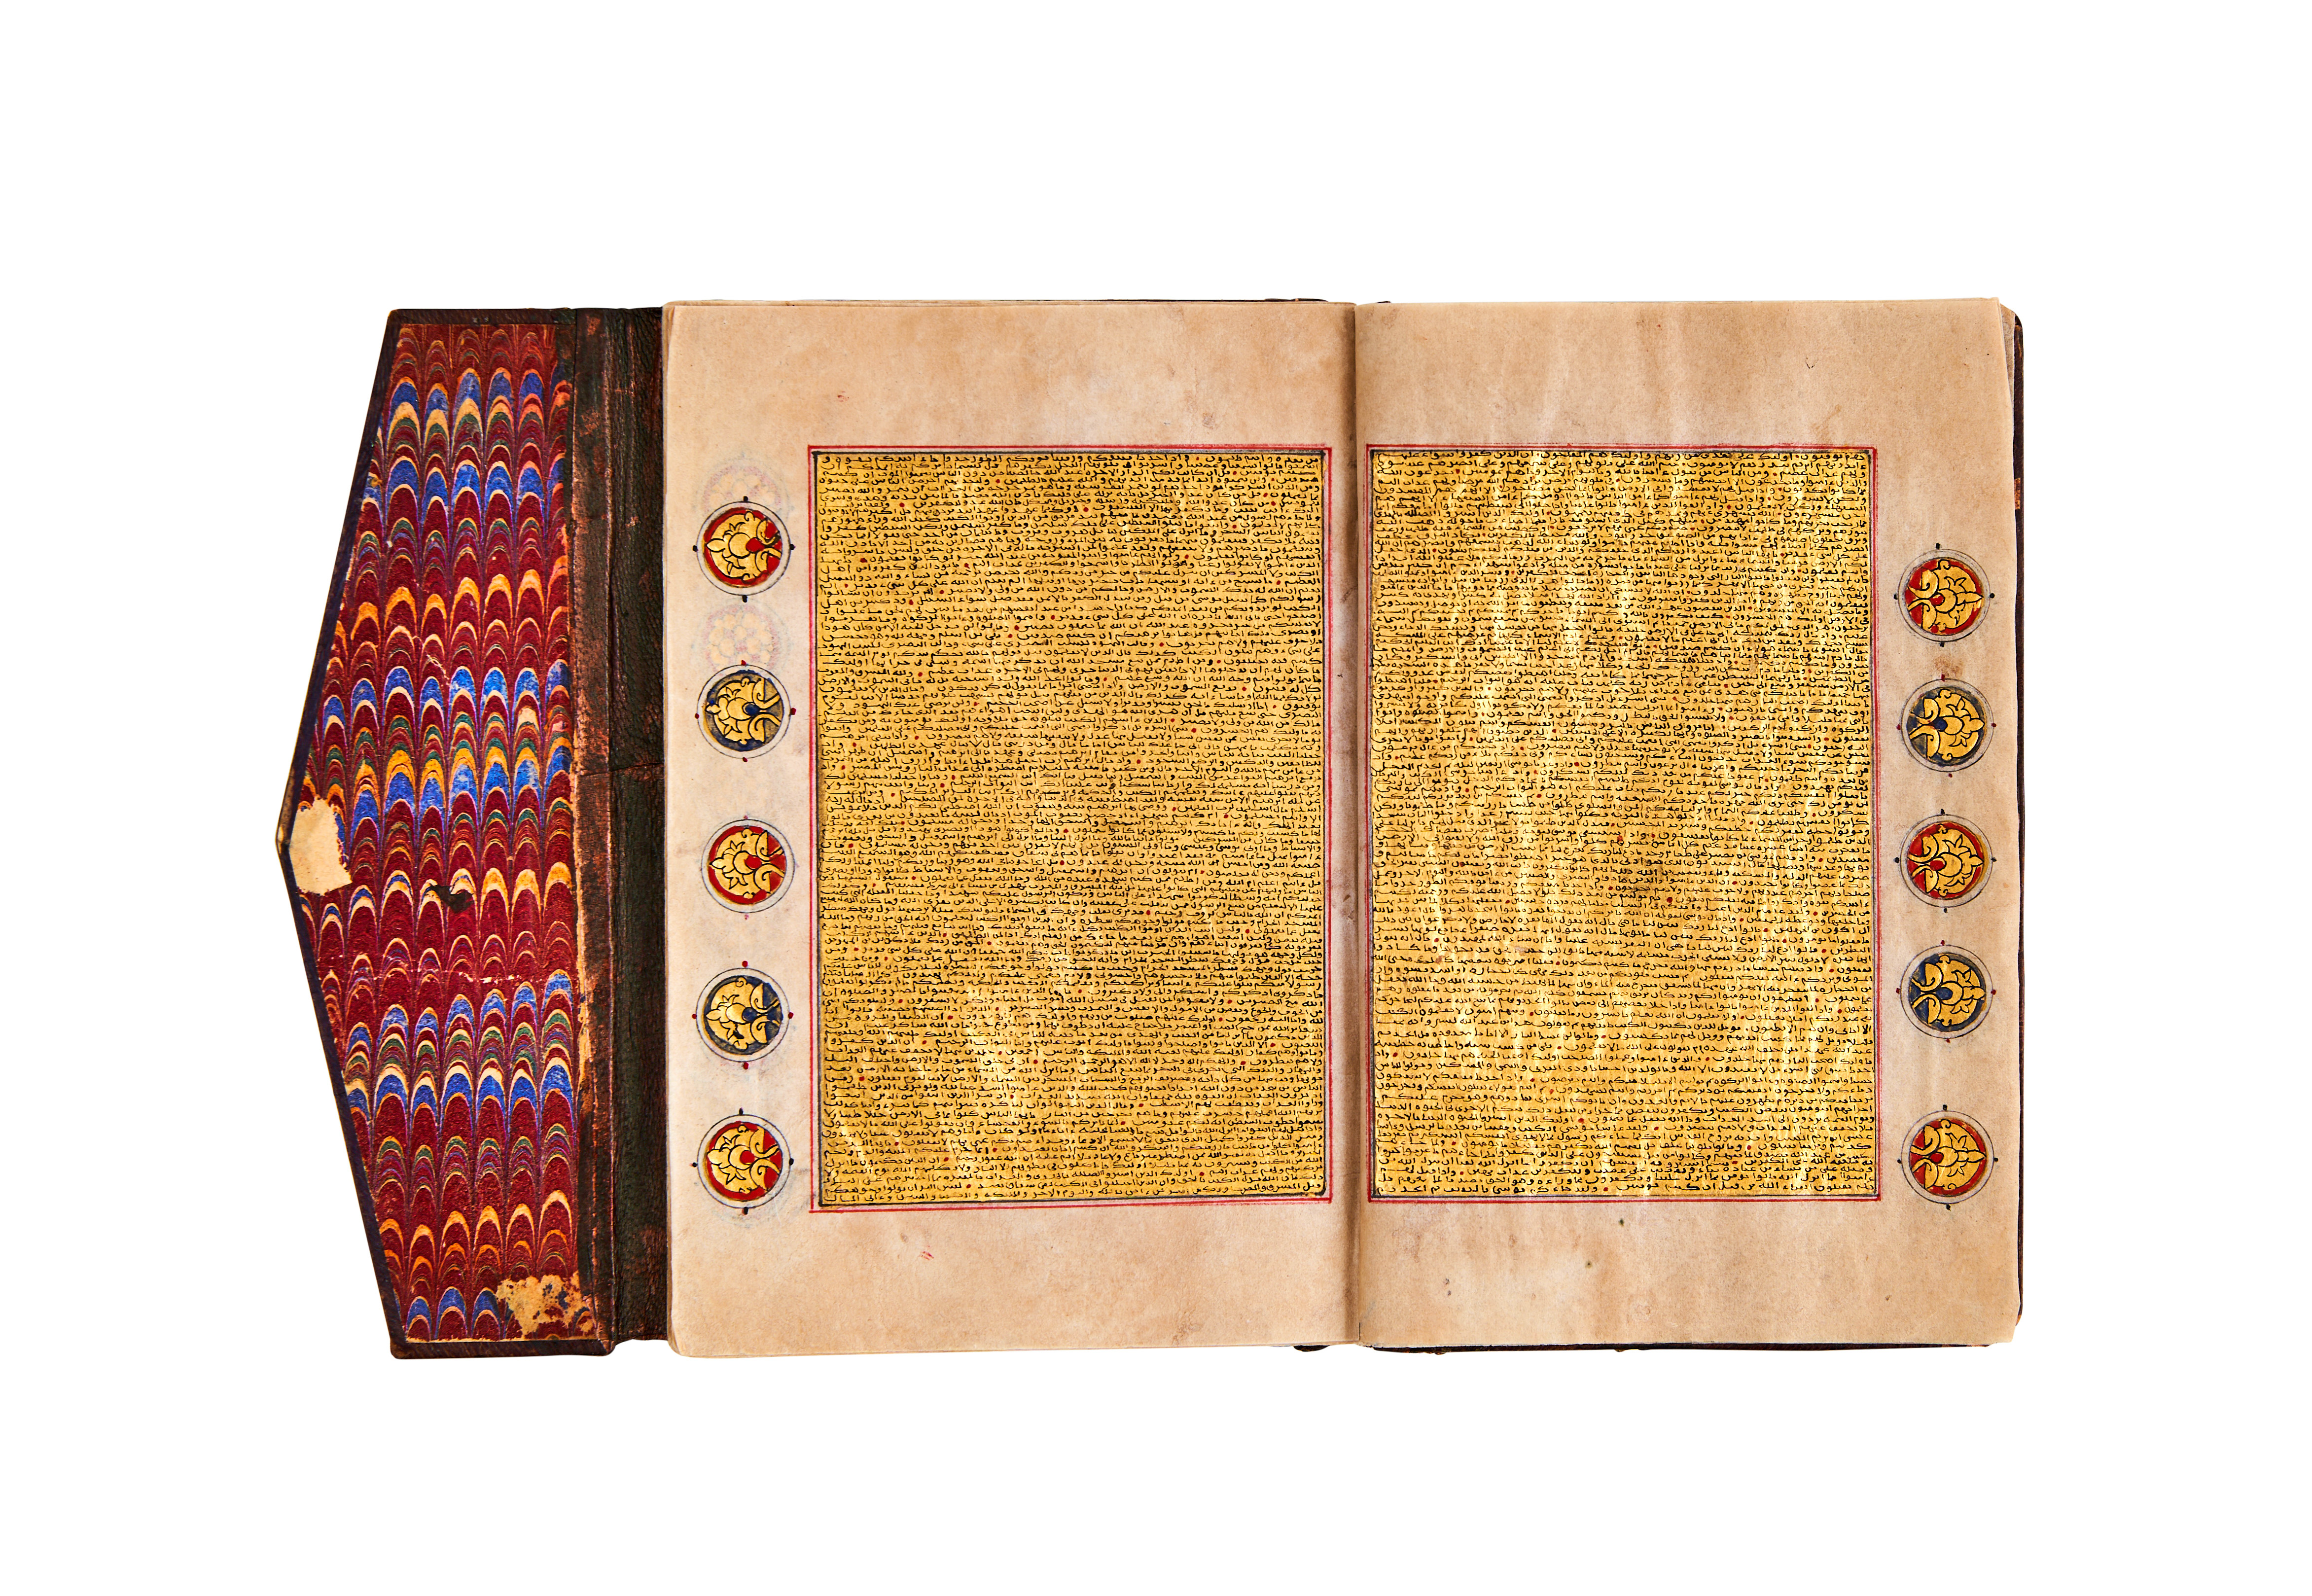 A COMPLETE GOLD MINIATURE QURAN, FOR HIS EXCELLENCE ABU ABDALLAH YUSEF, DATED 1288AH, COPIED BY FAT - Image 3 of 9